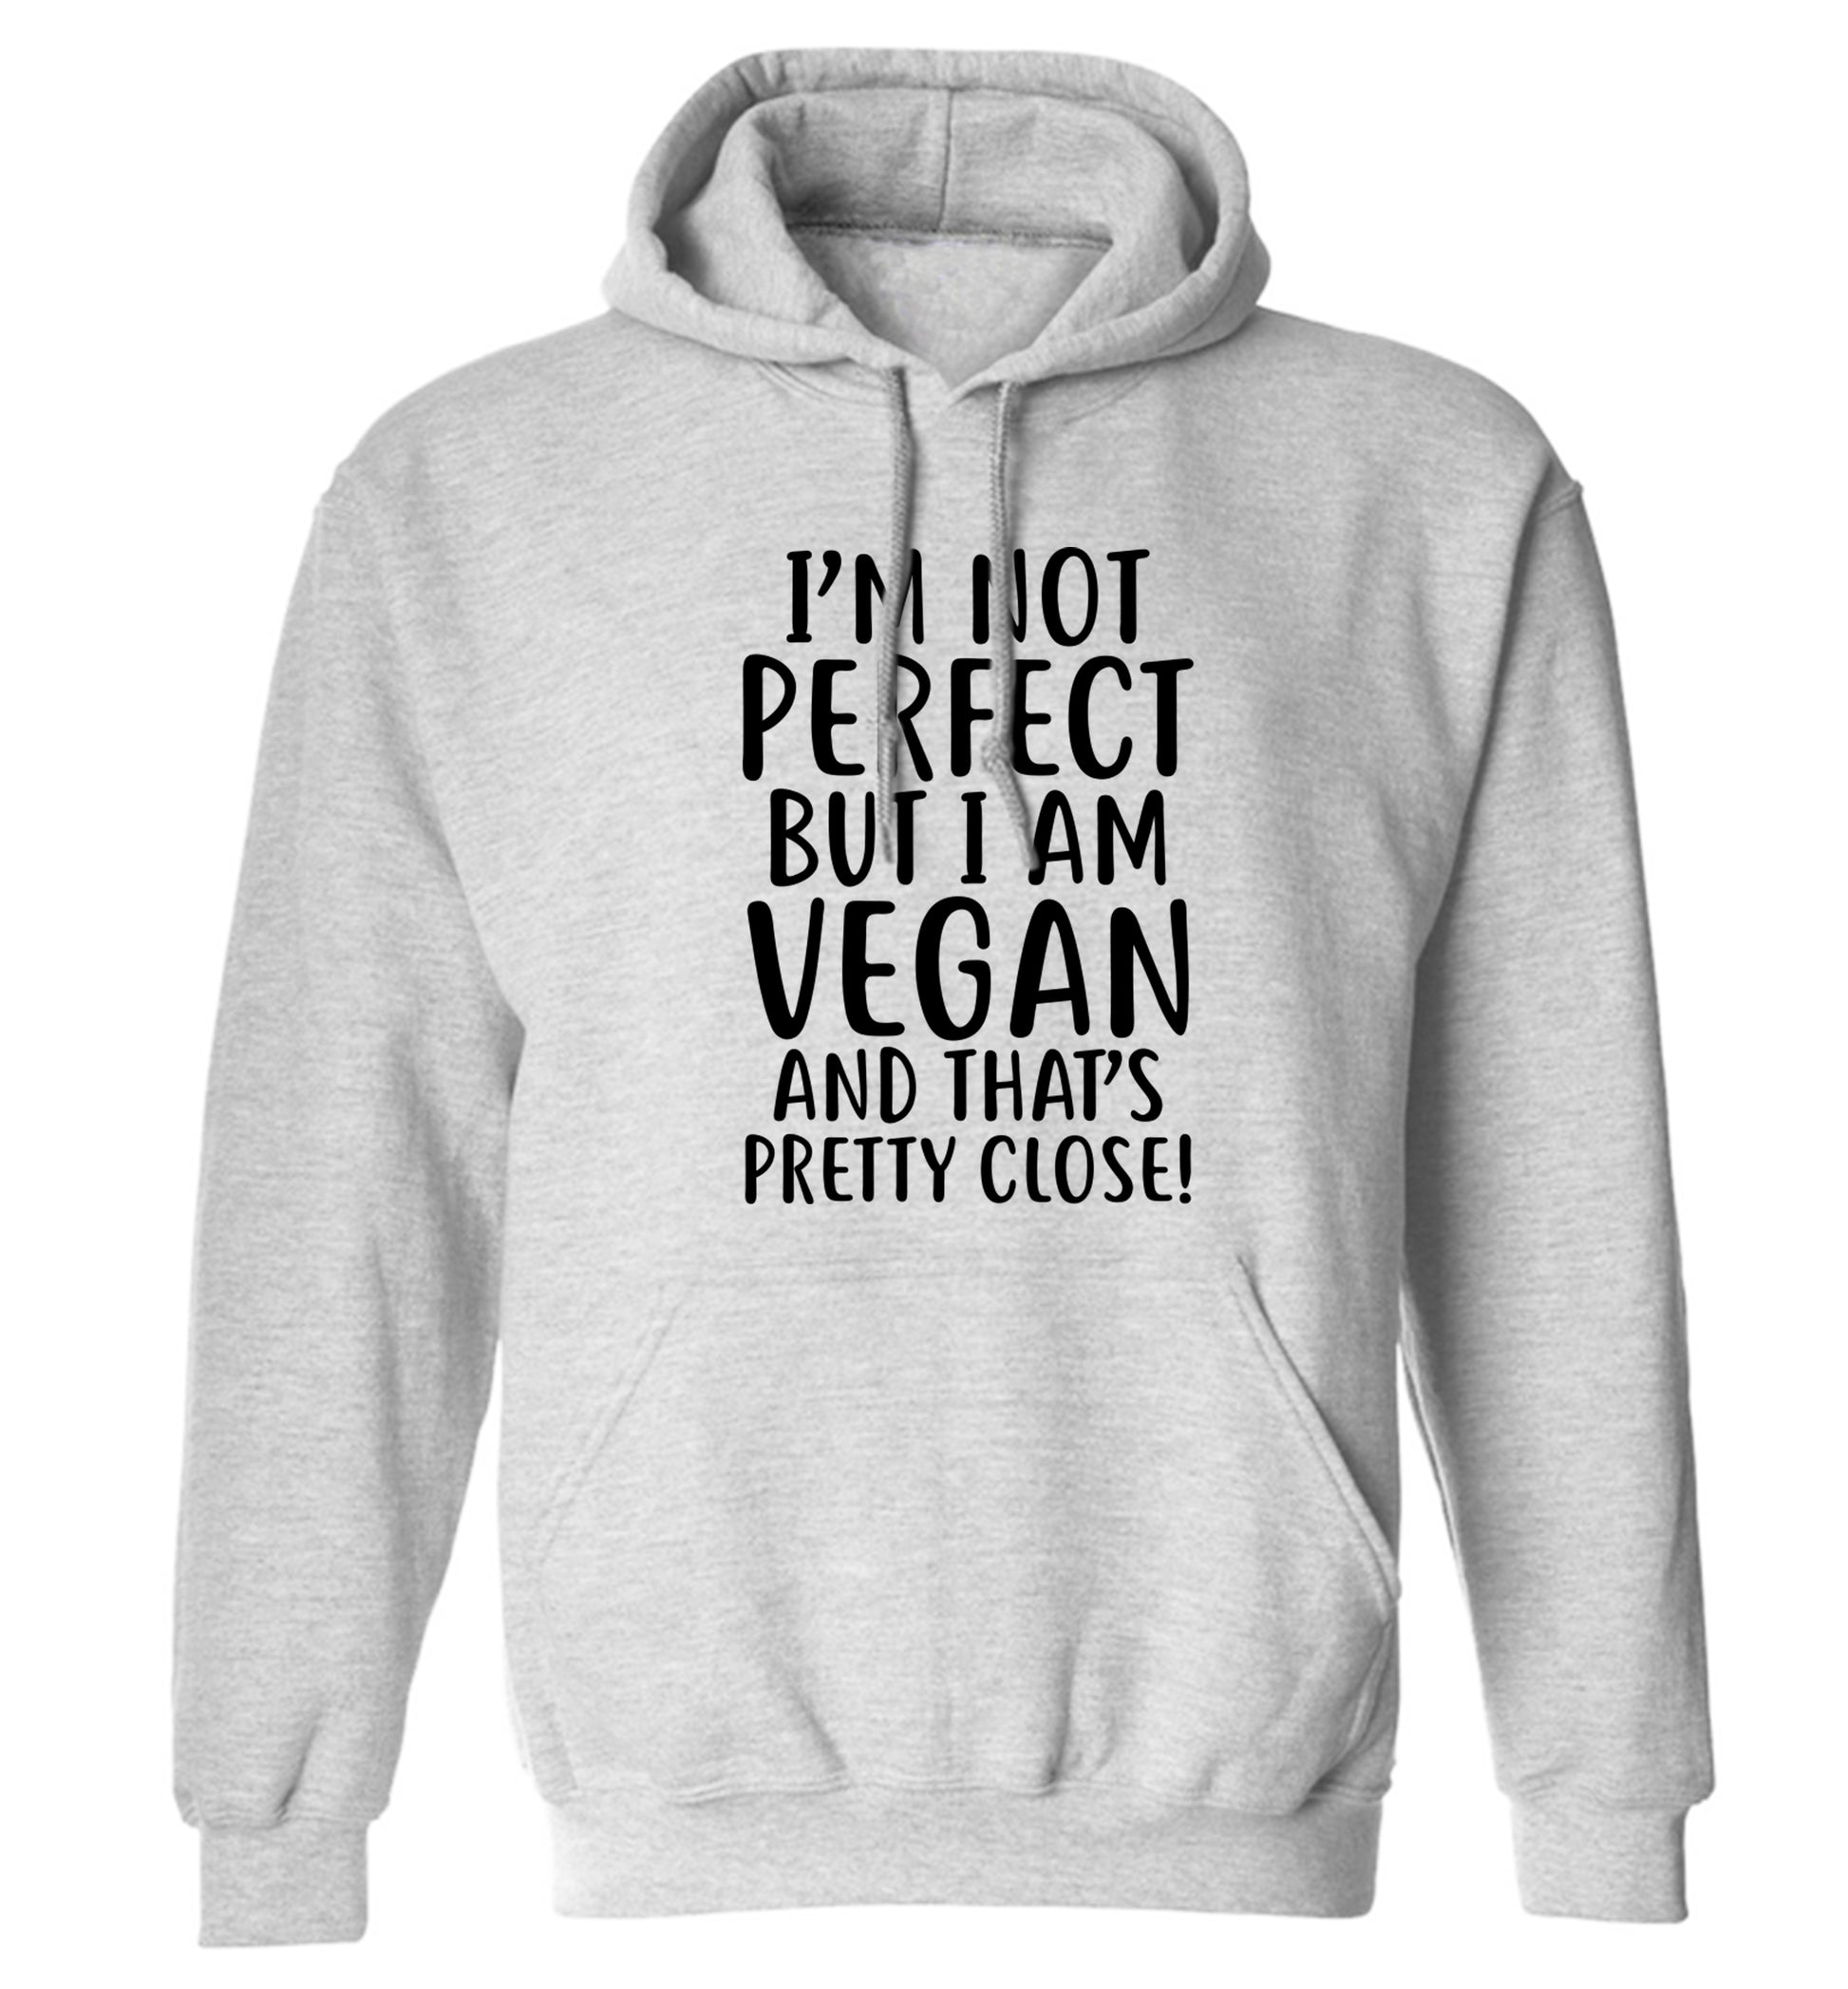 Might not be perfect but I am vegan adults unisex grey hoodie 2XL